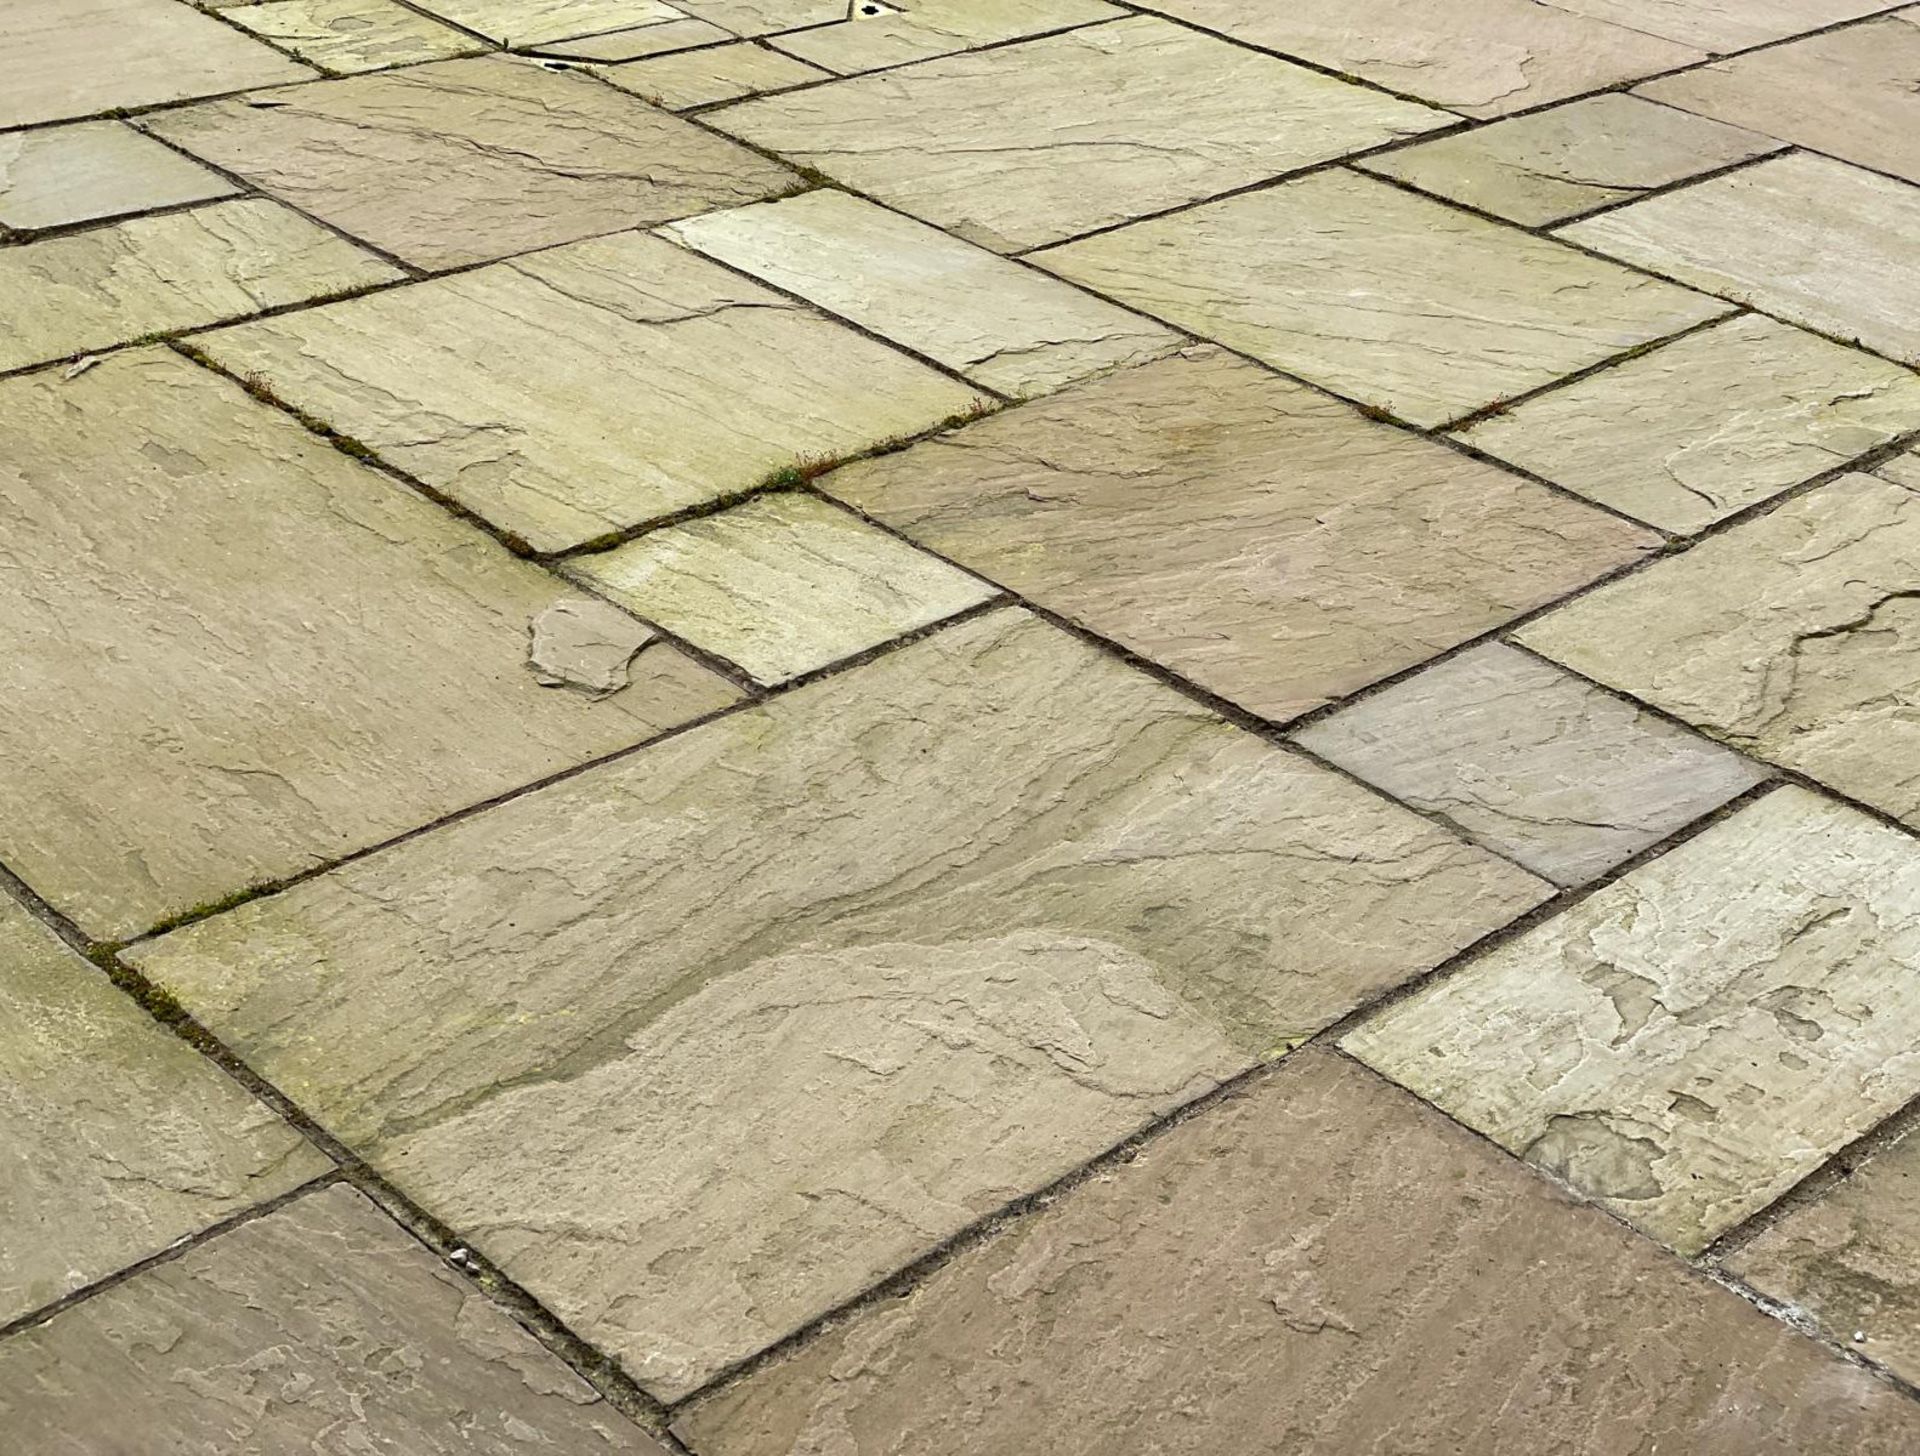 Large Quantity of Yorkstone Paving - Over 340sqm - CL896 - NO VAT ON THE HAMMER - Location: Wilmslow